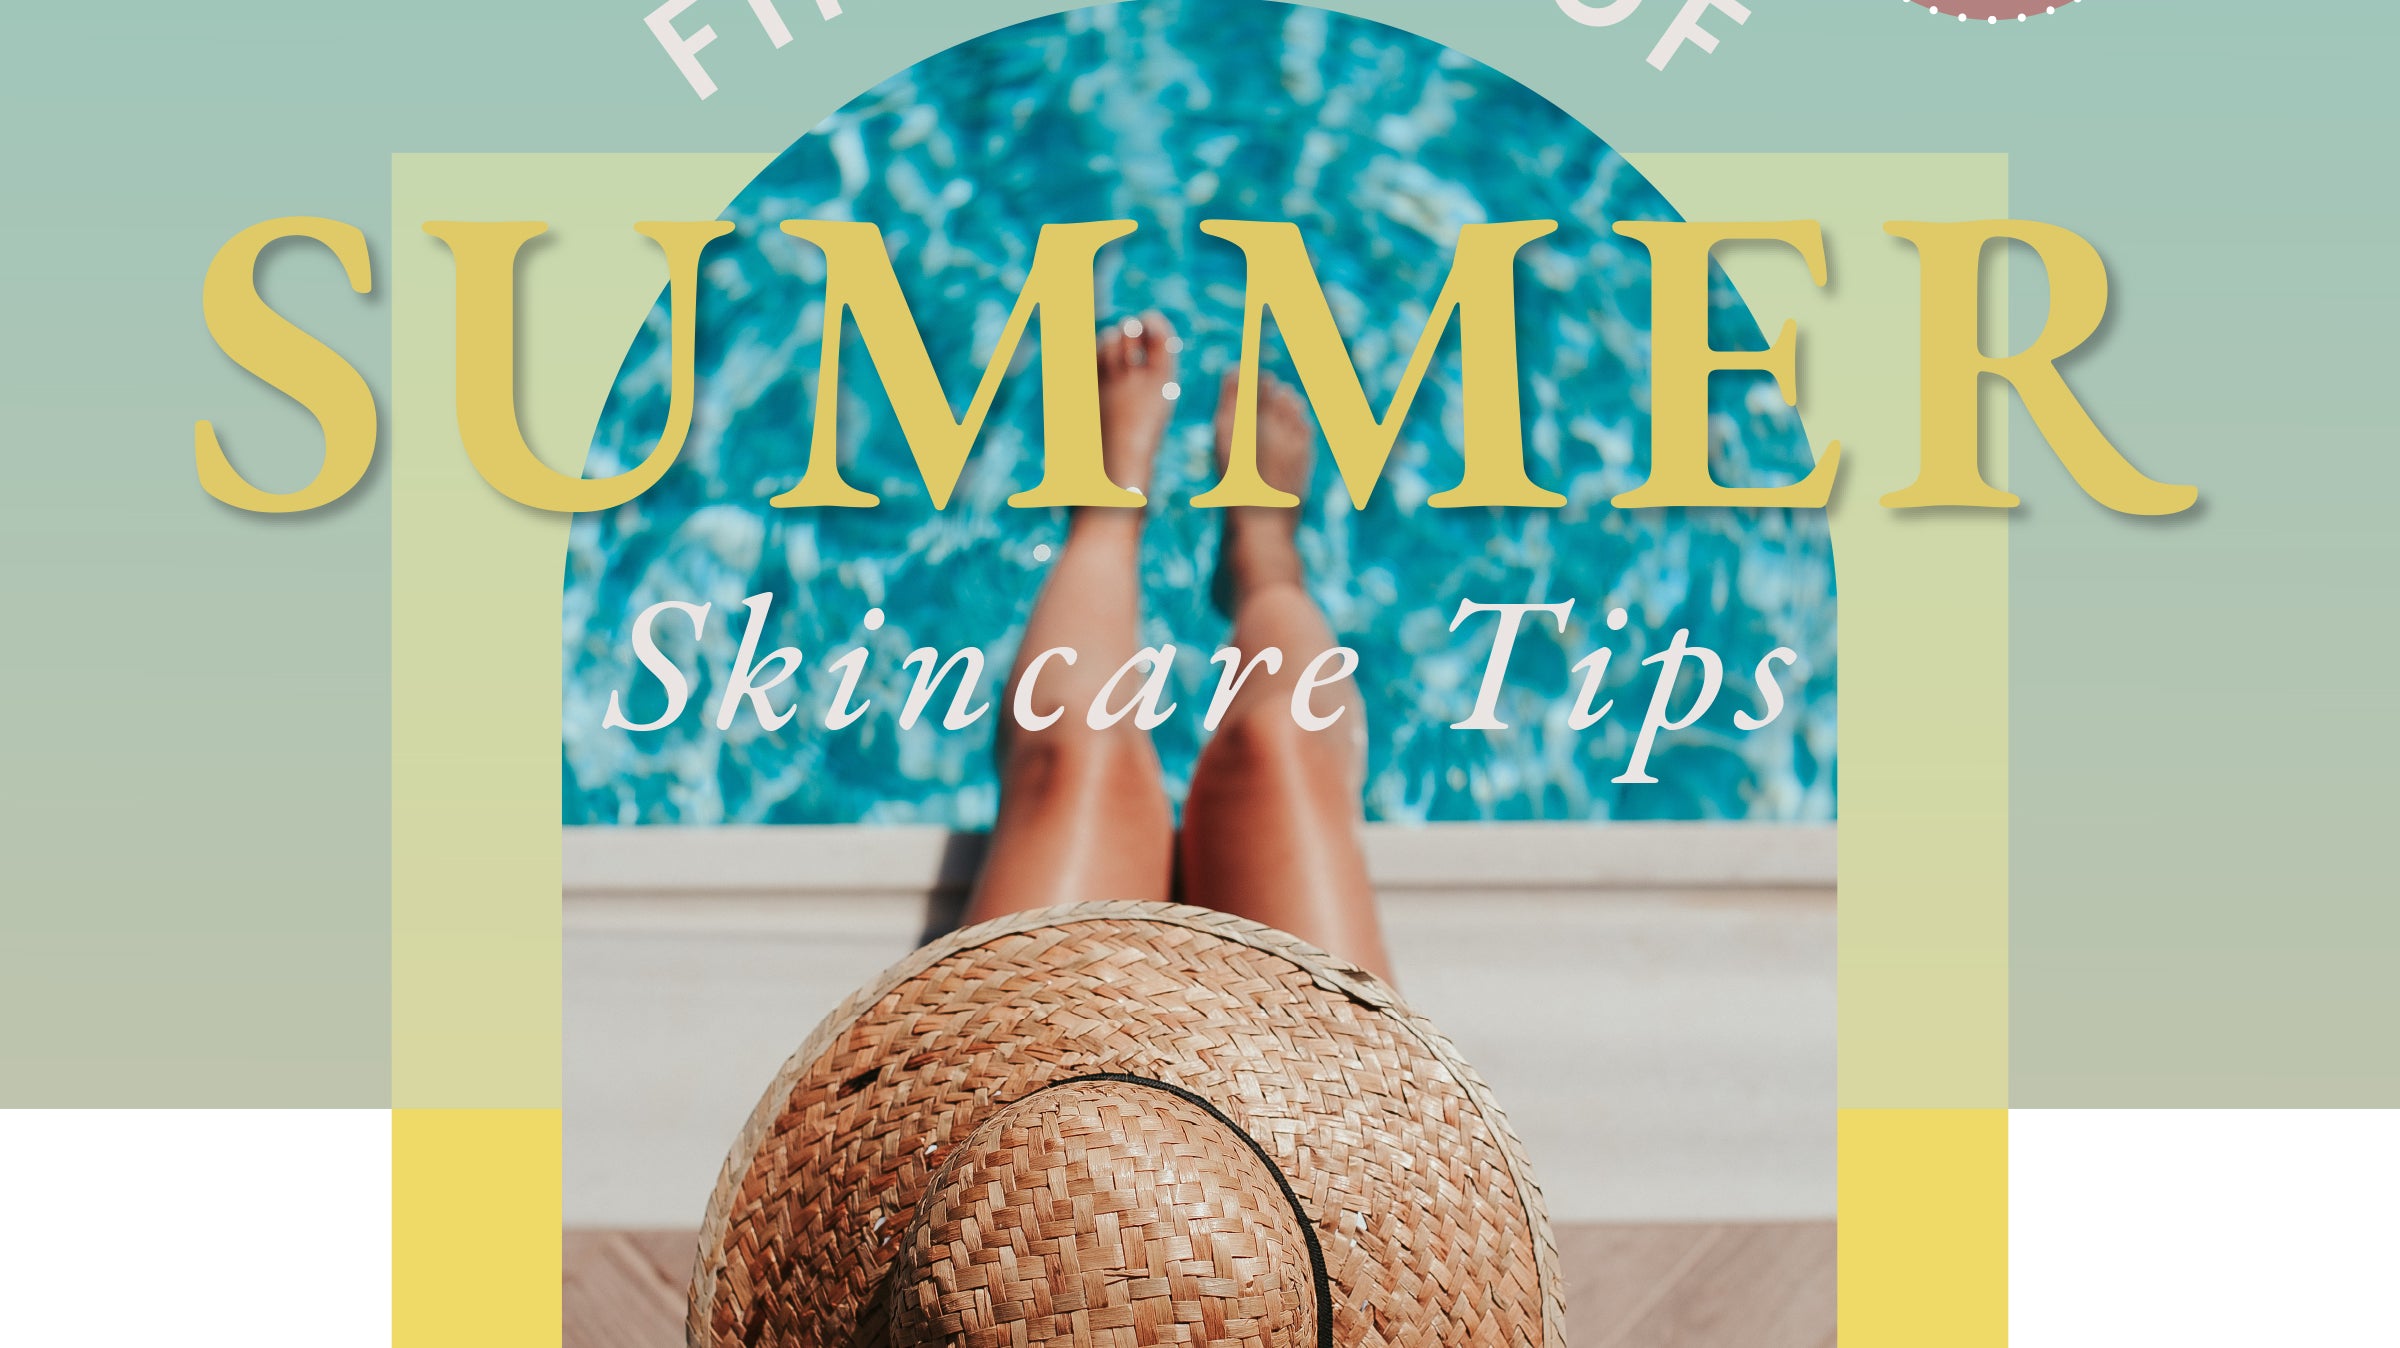 Summer is Here! Time to Transition your Skincare Routine 😎